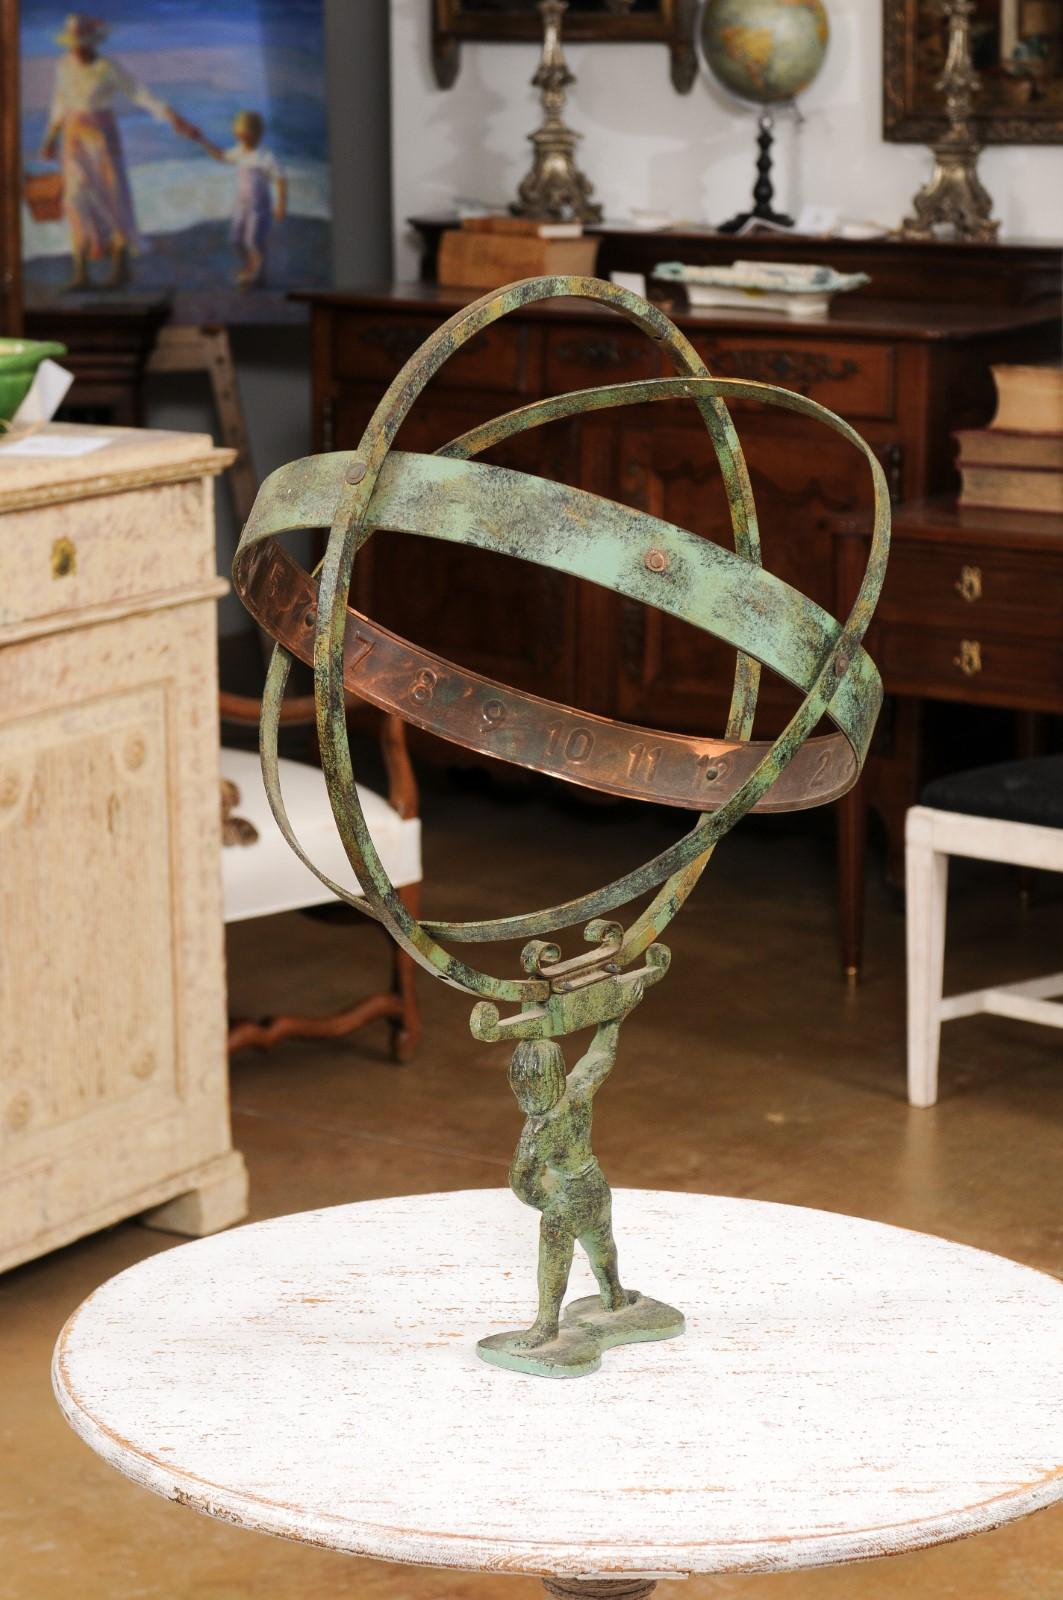 A French bronze armillary sphere depicting Atlas carrying the world from the late 19th century with verdigris patina. Created in France during the last quarter of the 19th century, this bronze armillary sphere showcases a mythological theme